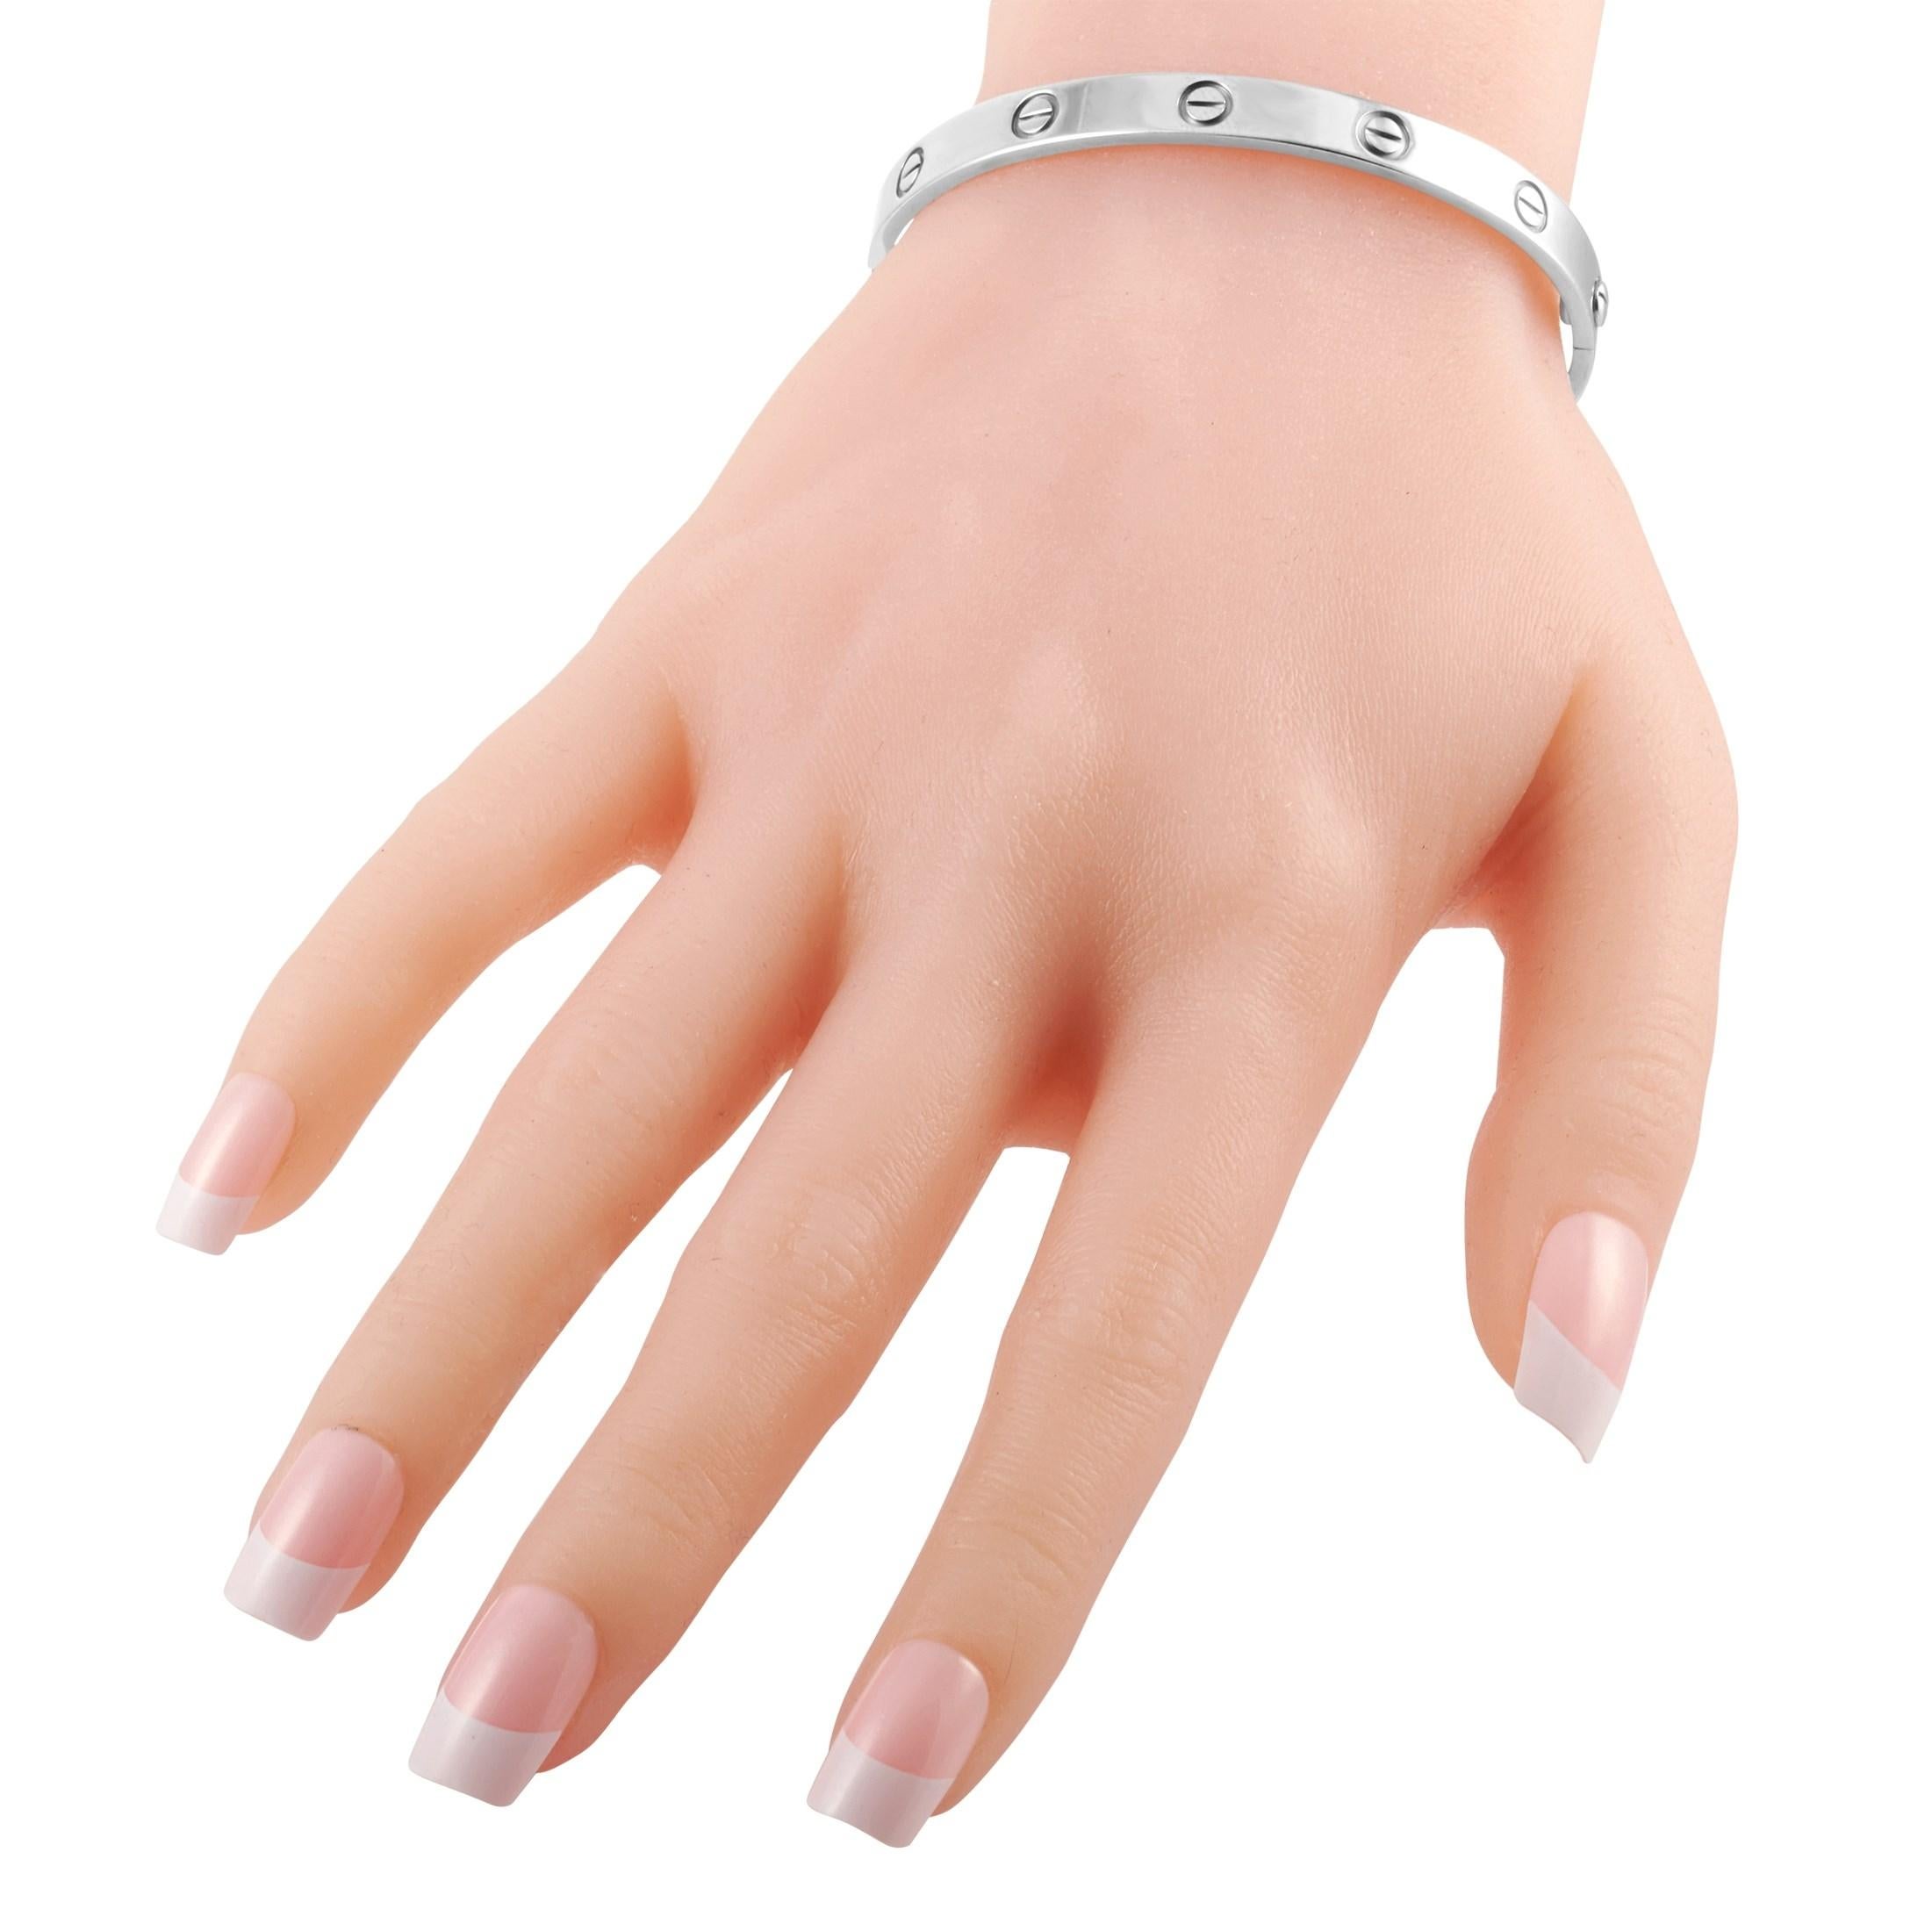 This size 17 Cartier 18K White Gold Love Bracelet is a versatile wrist accessory that's packed with style and meaning. It features a solid white gold band with evenly spaced screws. The clasp is secured by a special screwdriver. Locking this onto